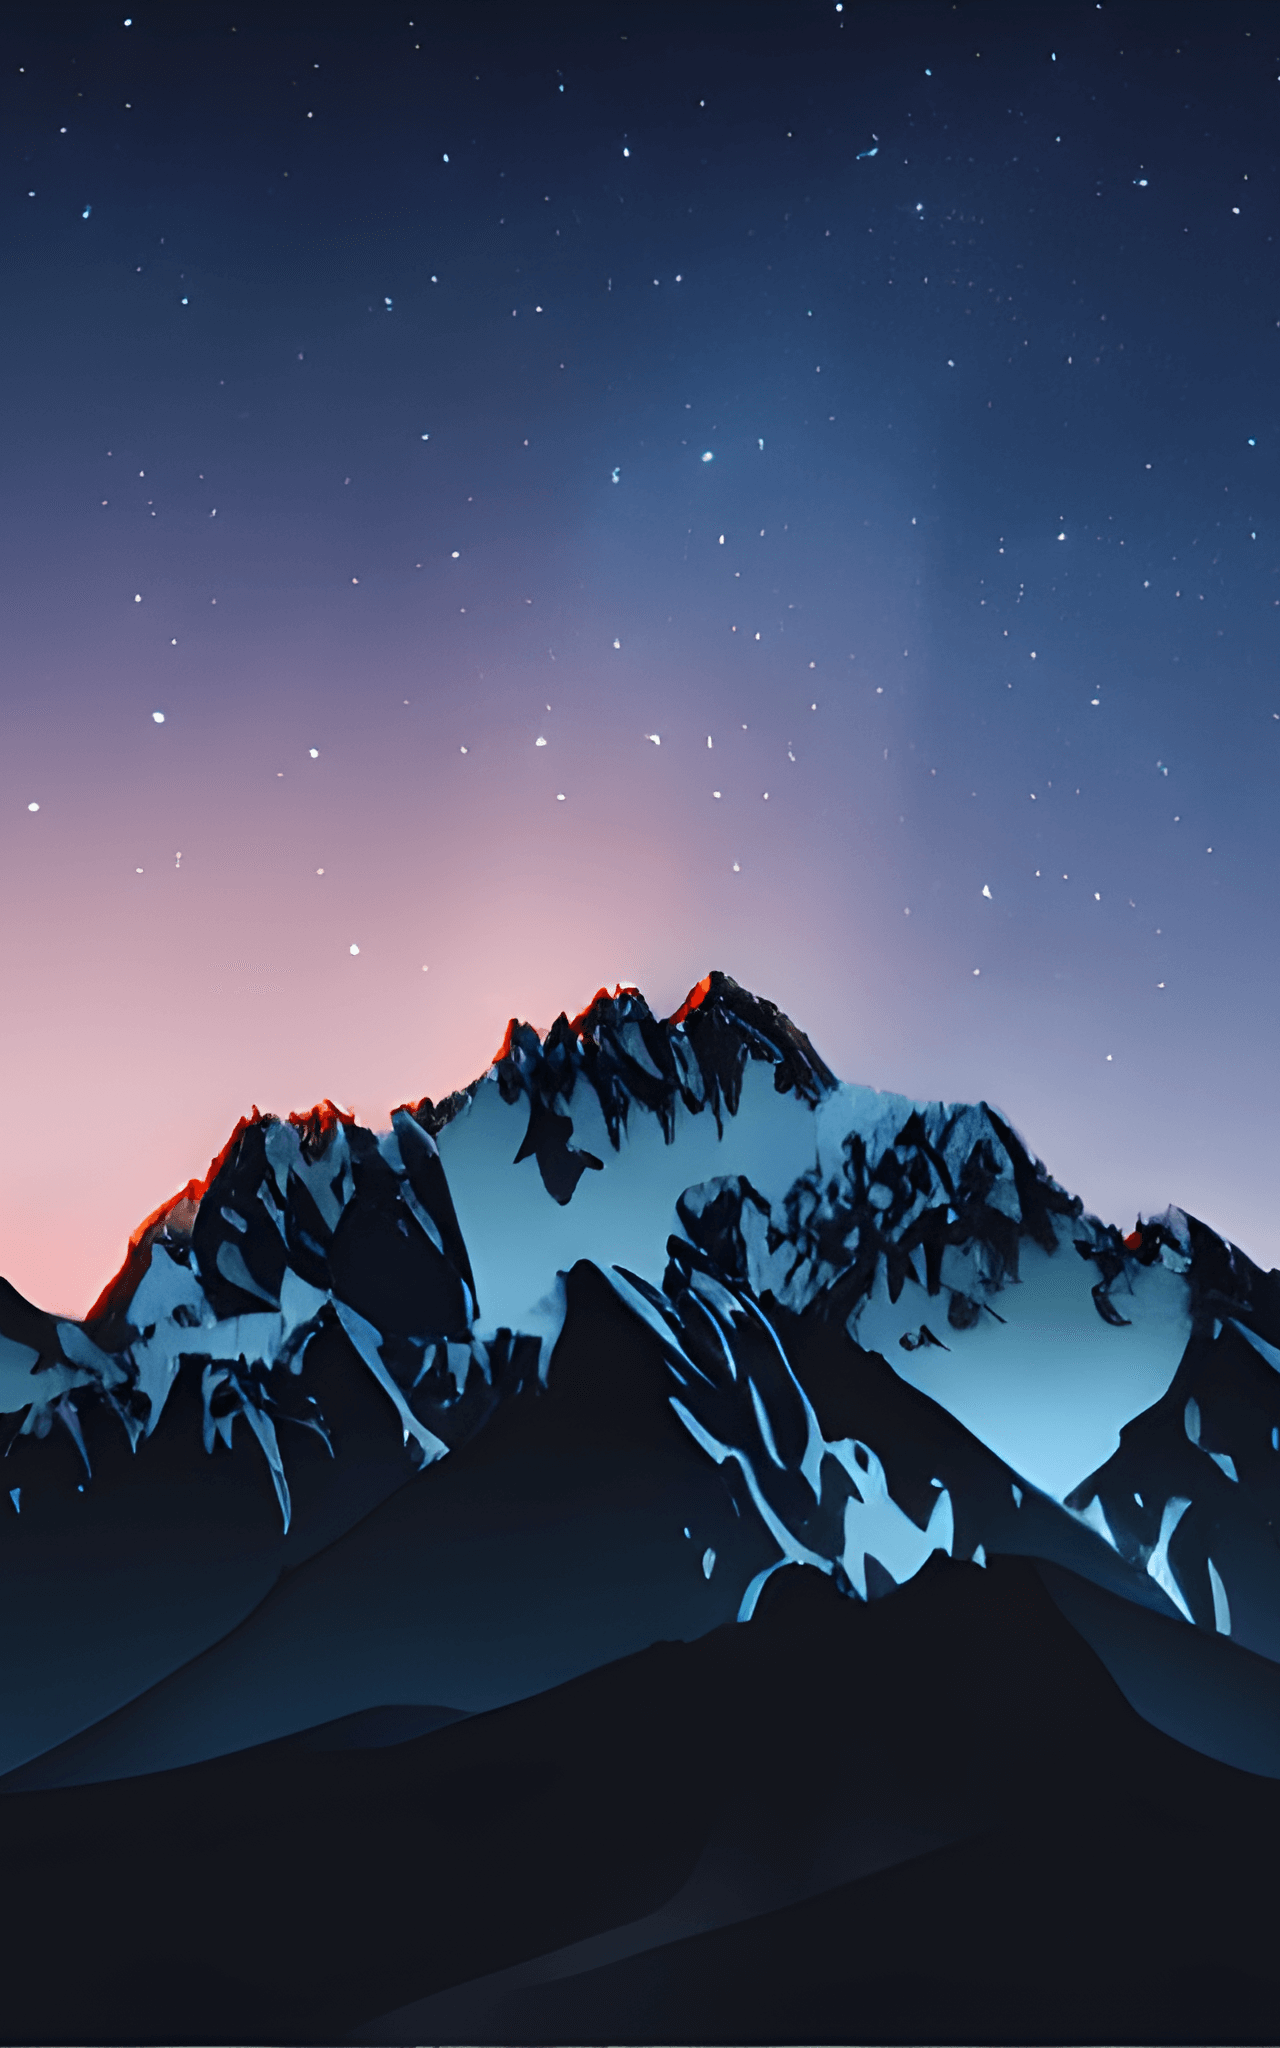 A mountain range with stars in the sky - Scenery